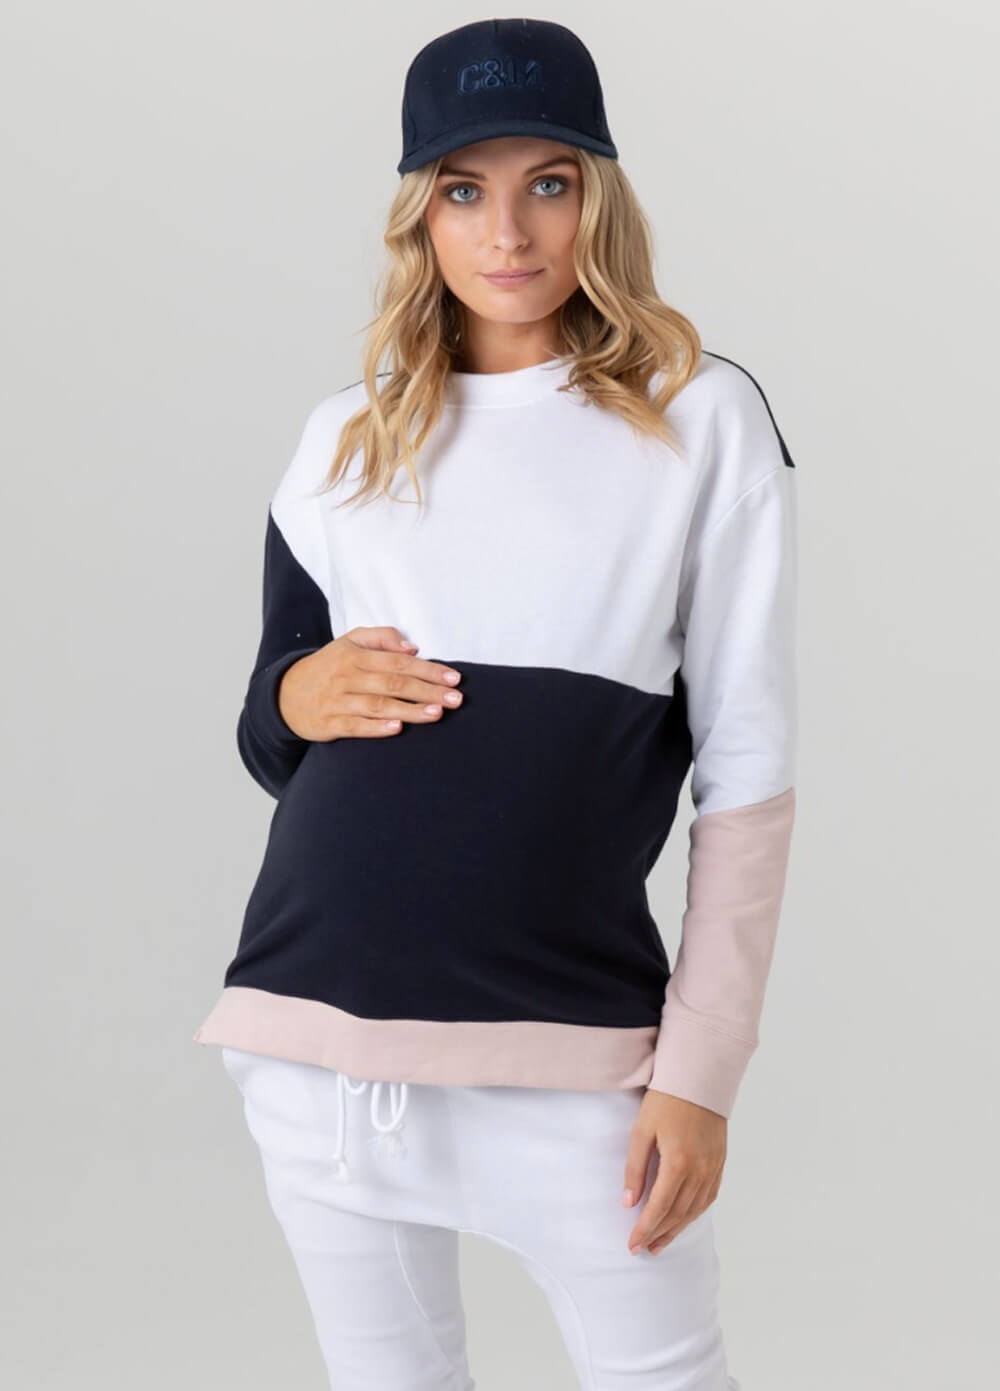 Queen Bee Nation Maternity Nursing Sweater in White/Blush/Navy by Legoe